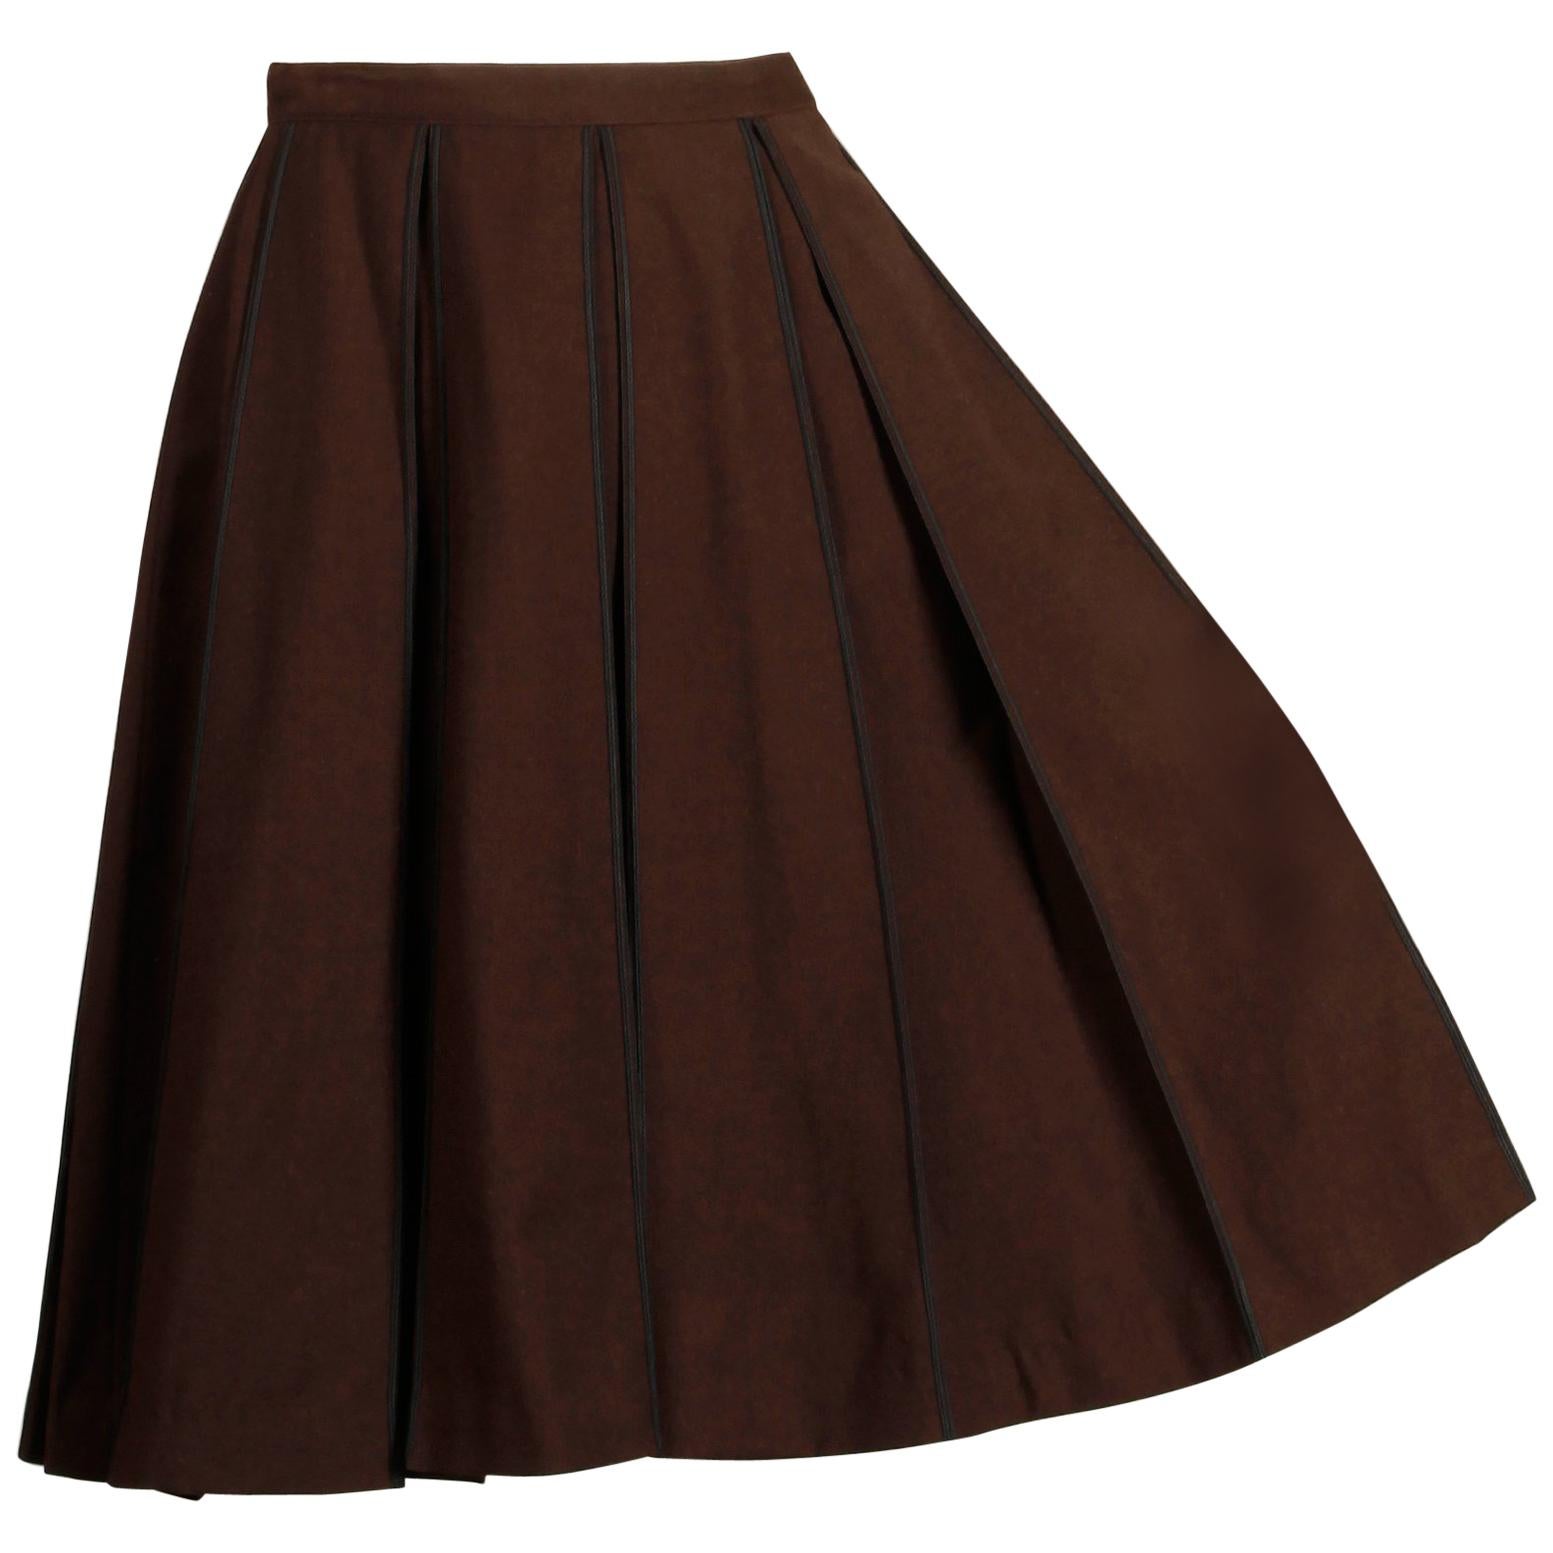 1960s B.H. Wragge Vintage Brown Wool Skirt with Box Pleats + Black Cord Trim For Sale